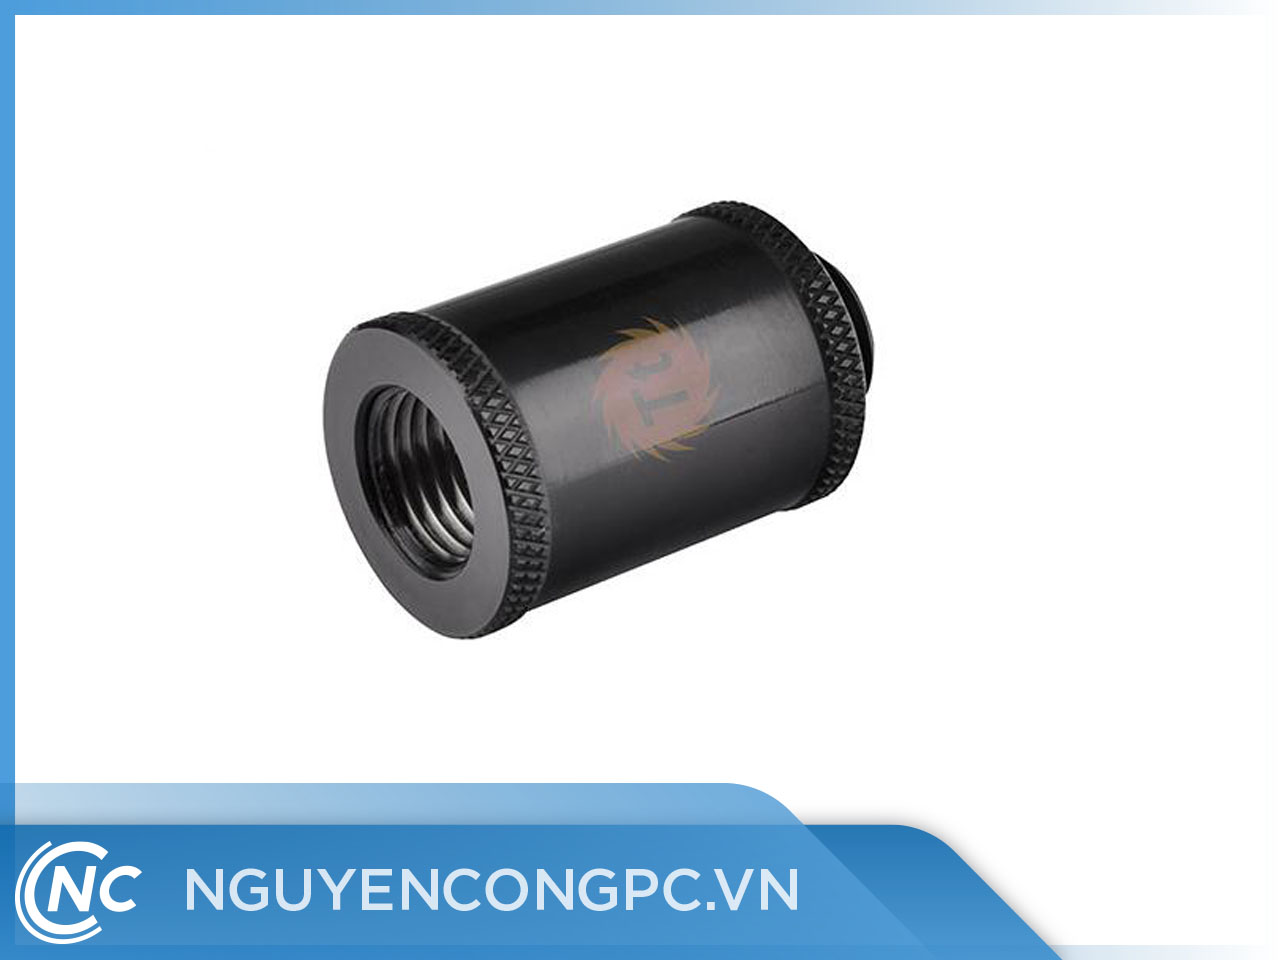 Ống nối Pacific G1/4 Female to Male 30mm Extender - Black CL-W047-CU00BL-A Thermaltake